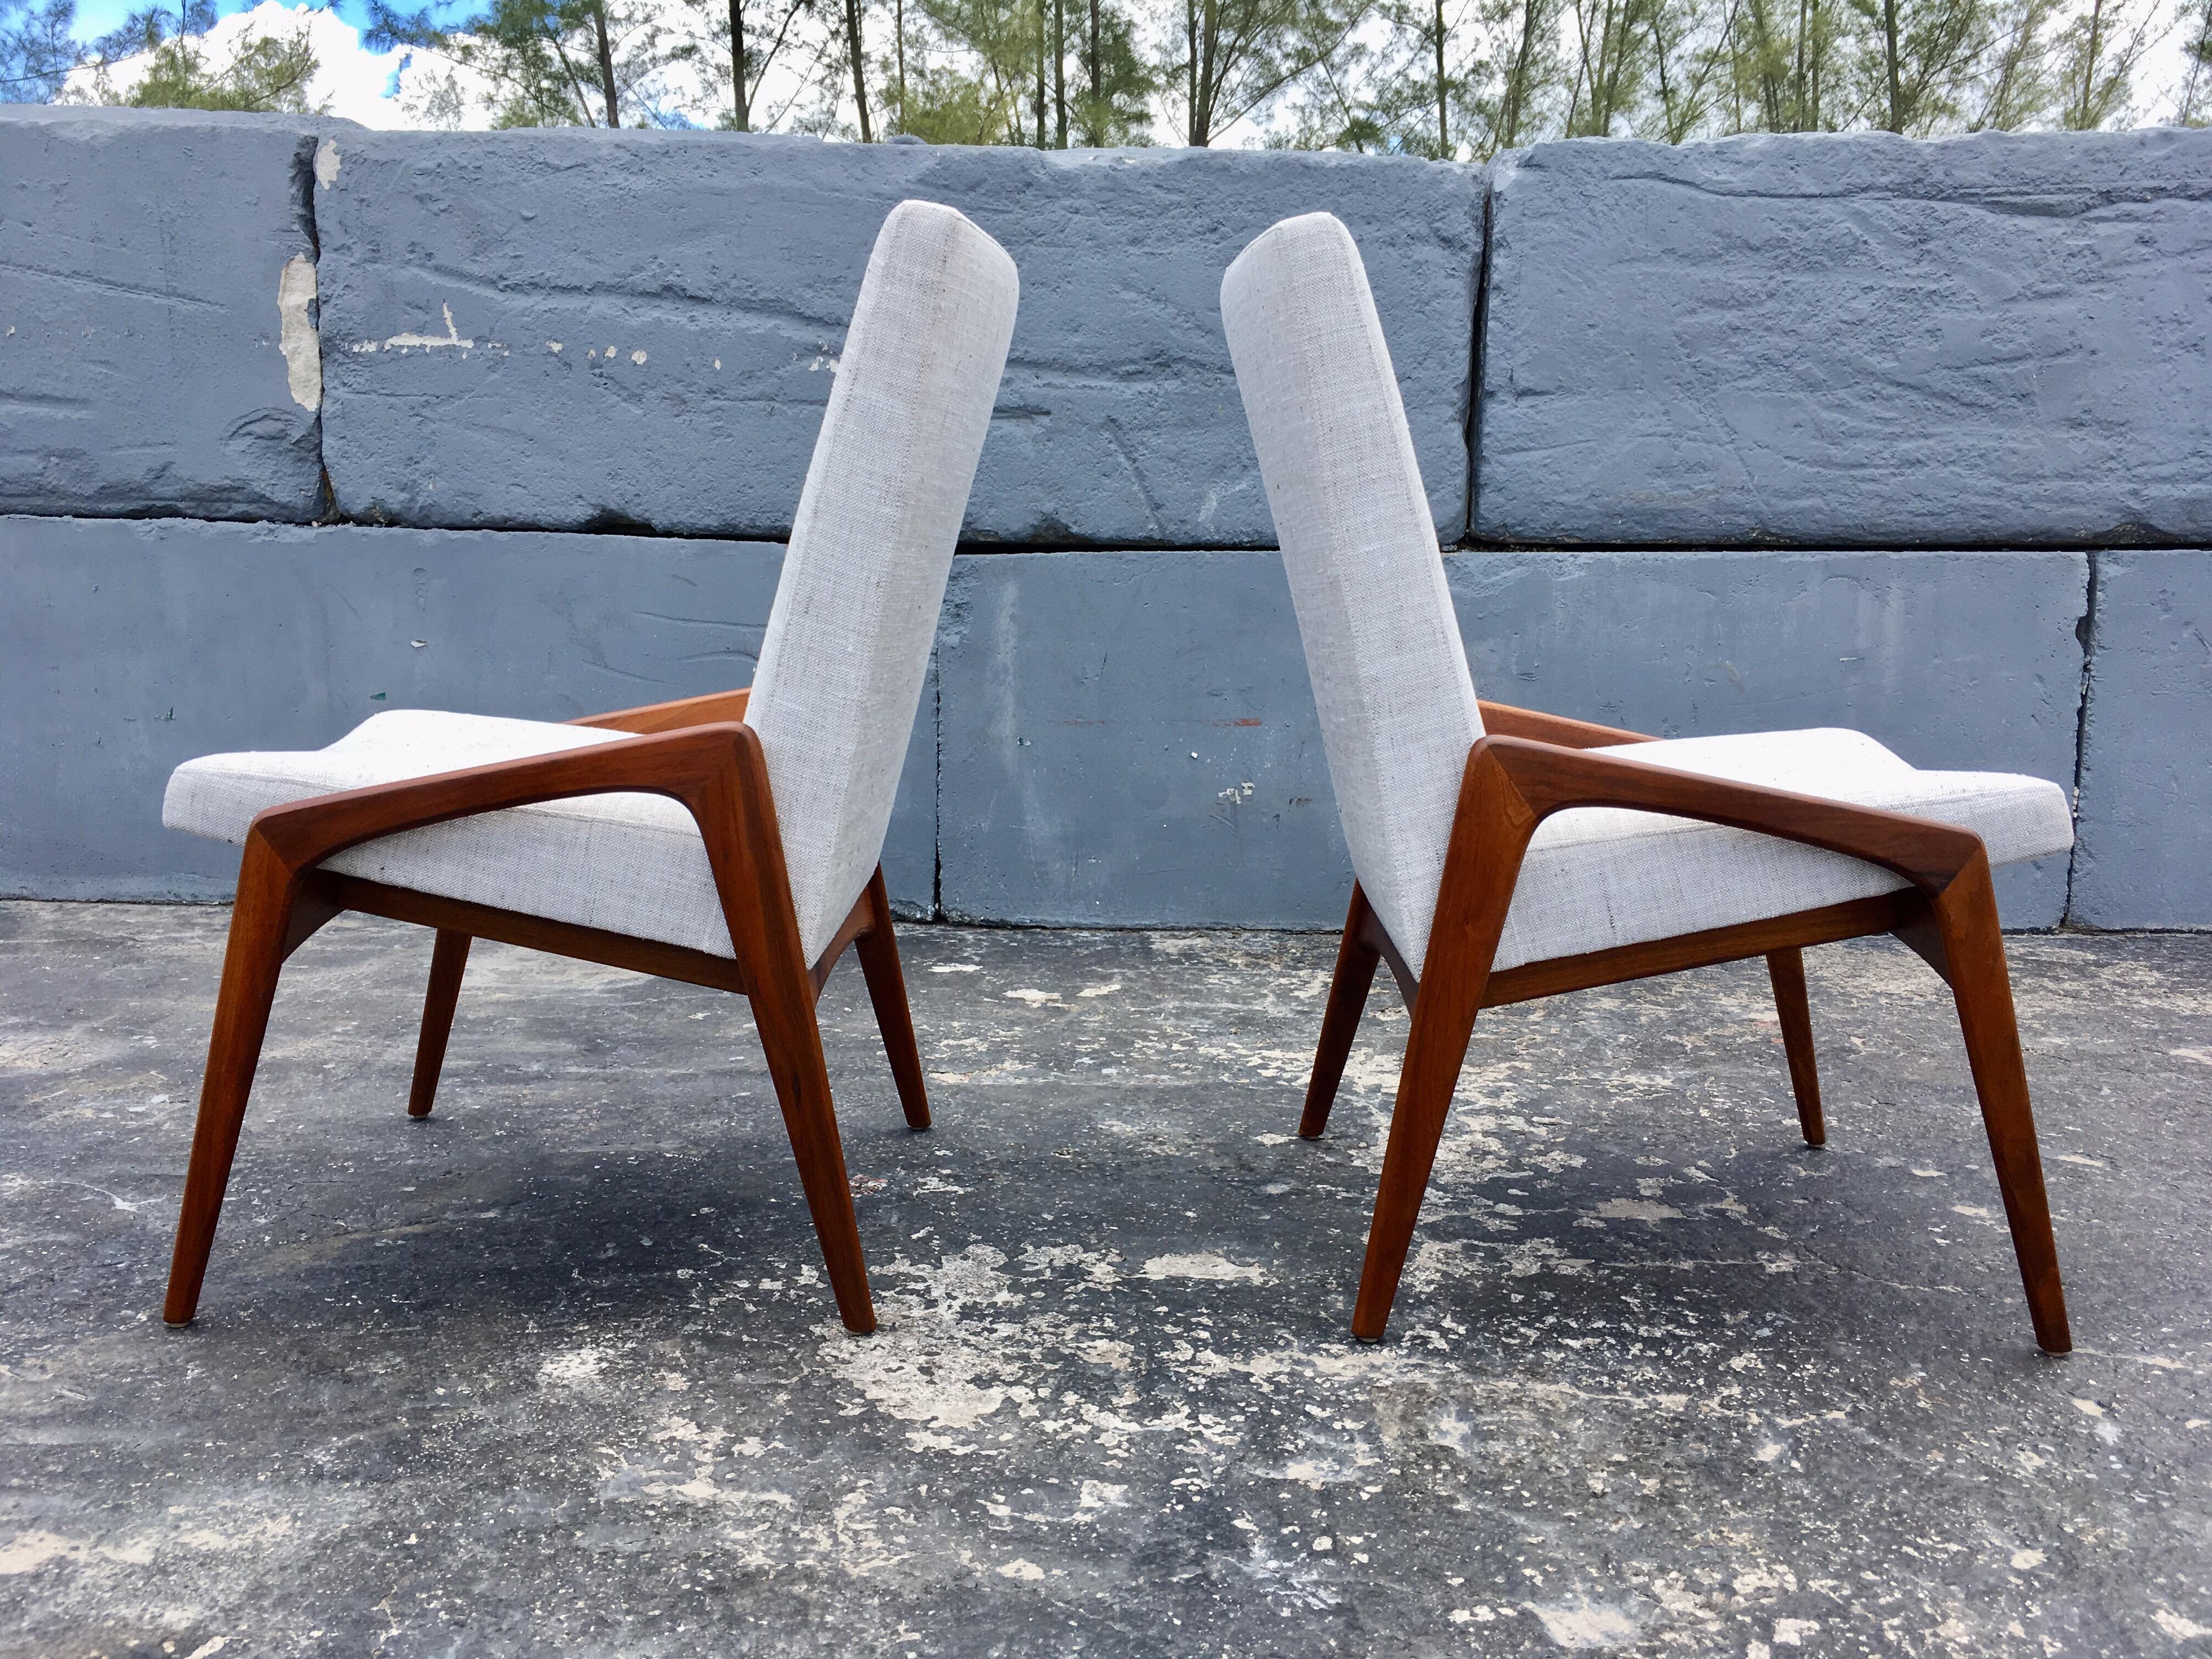 Pair of Danish Modern Chairs, Walnut, 1950s, Excellent Condition For Sale 1